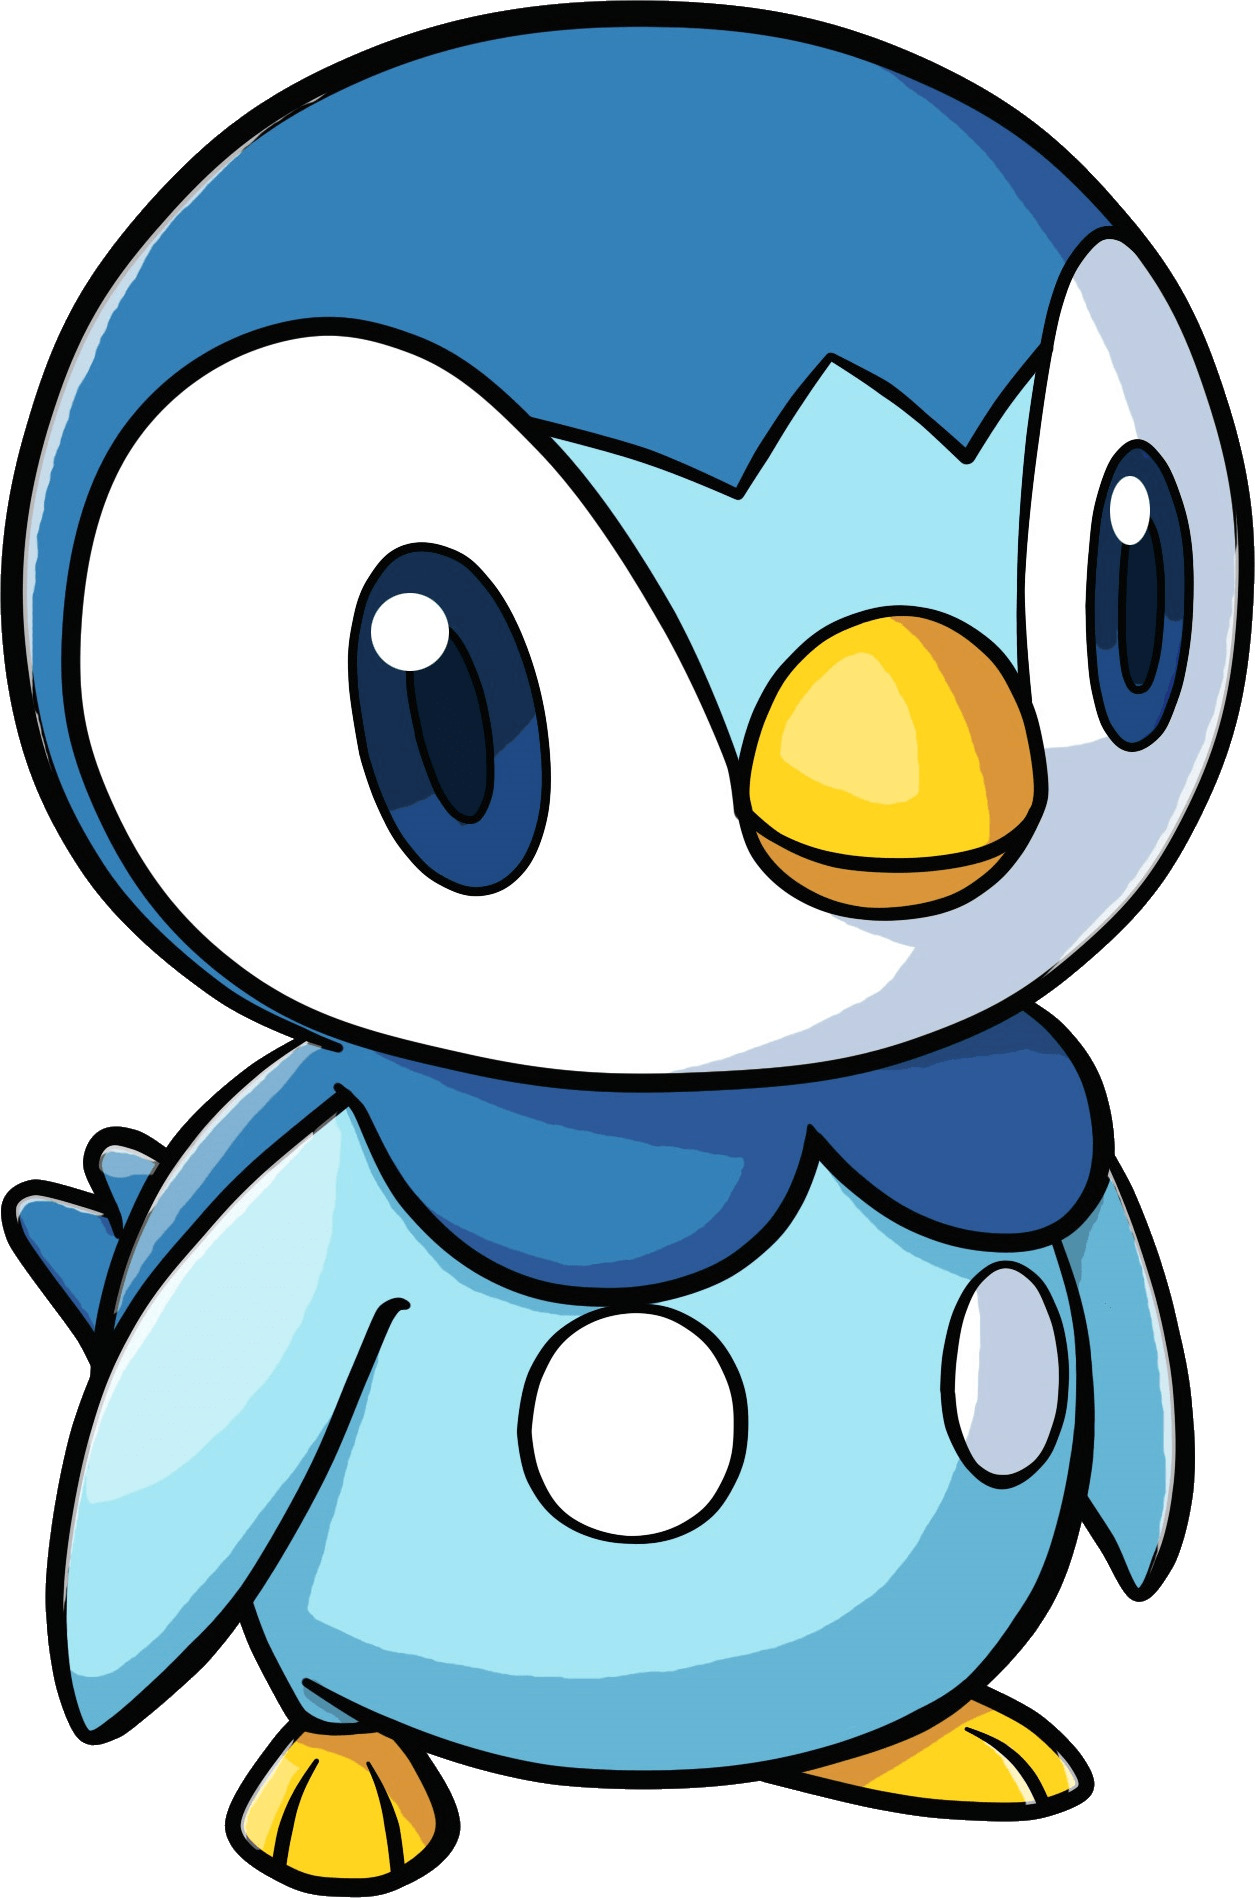 Piplup Pokemon png